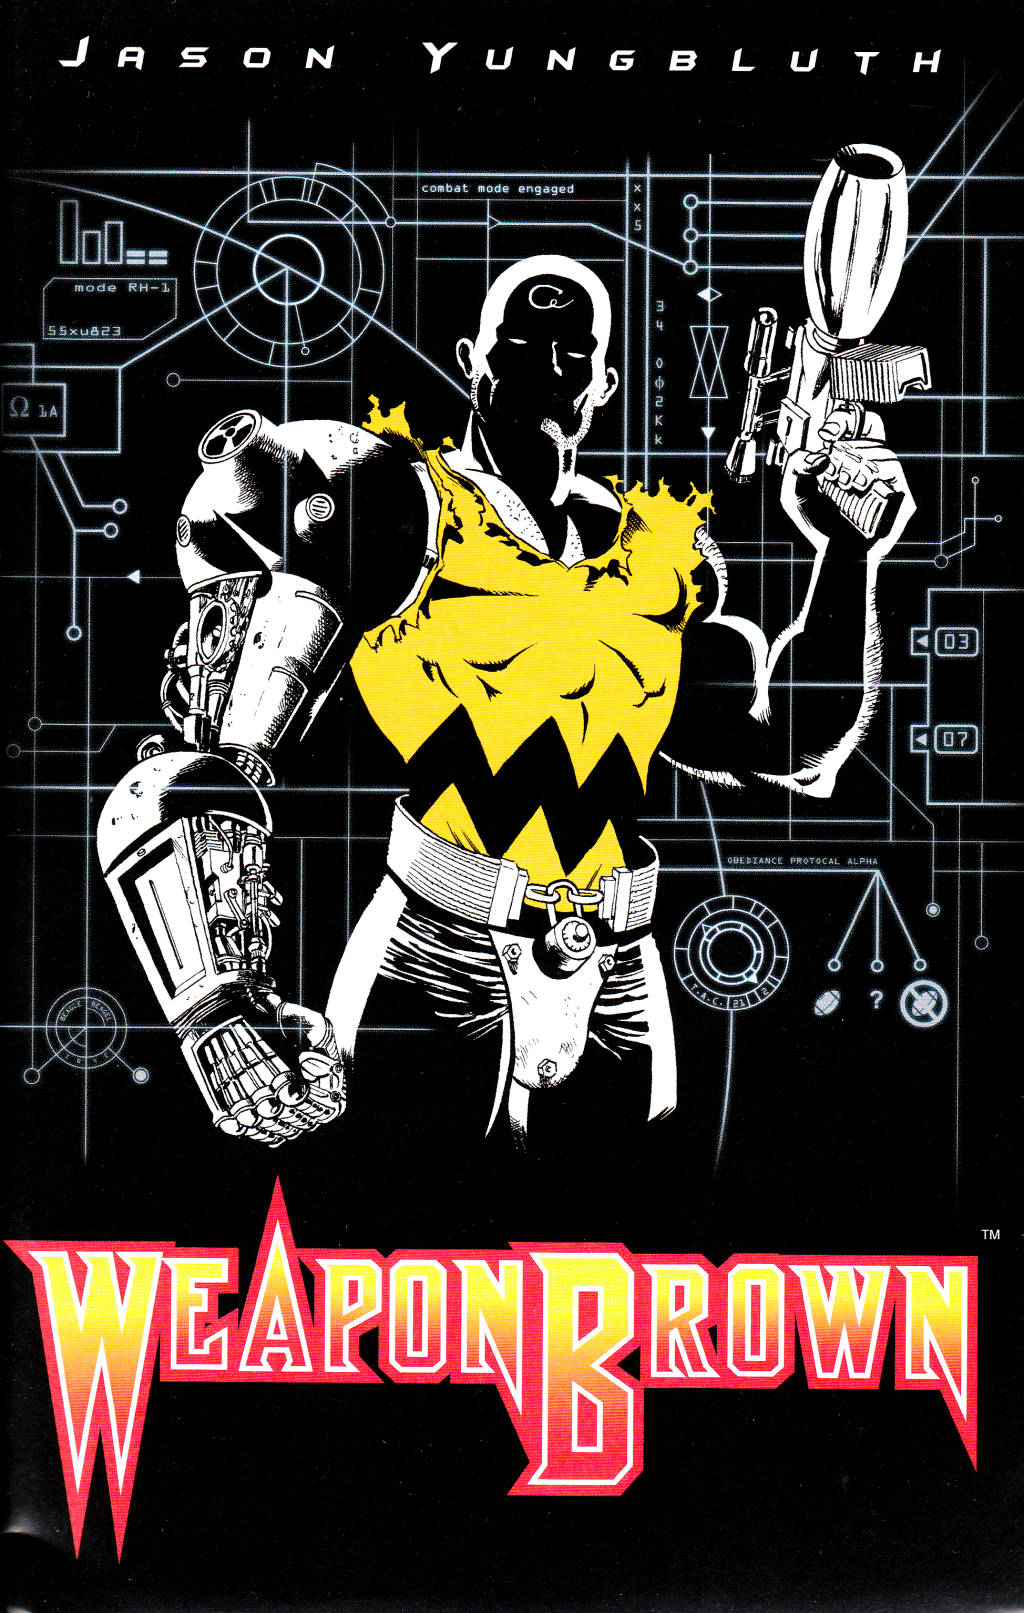 Read online Weapon Brown (2002) comic -  Issue # Full - 1